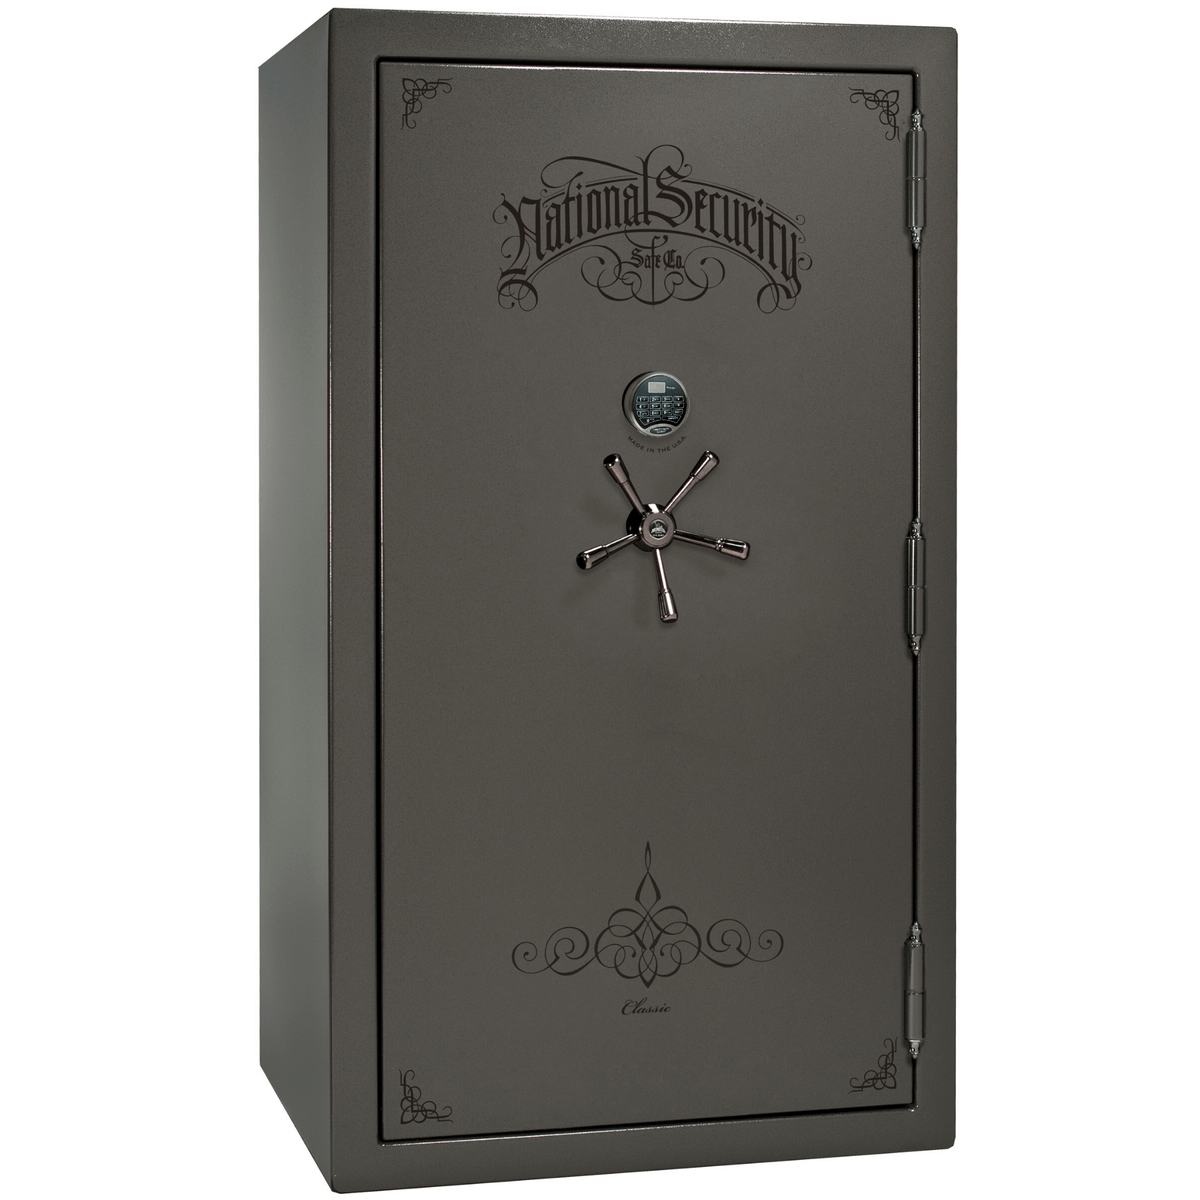 Liberty Safe Classic Plus 50 in Gray Marble with Black Chrome Electronic Lock, closed door.